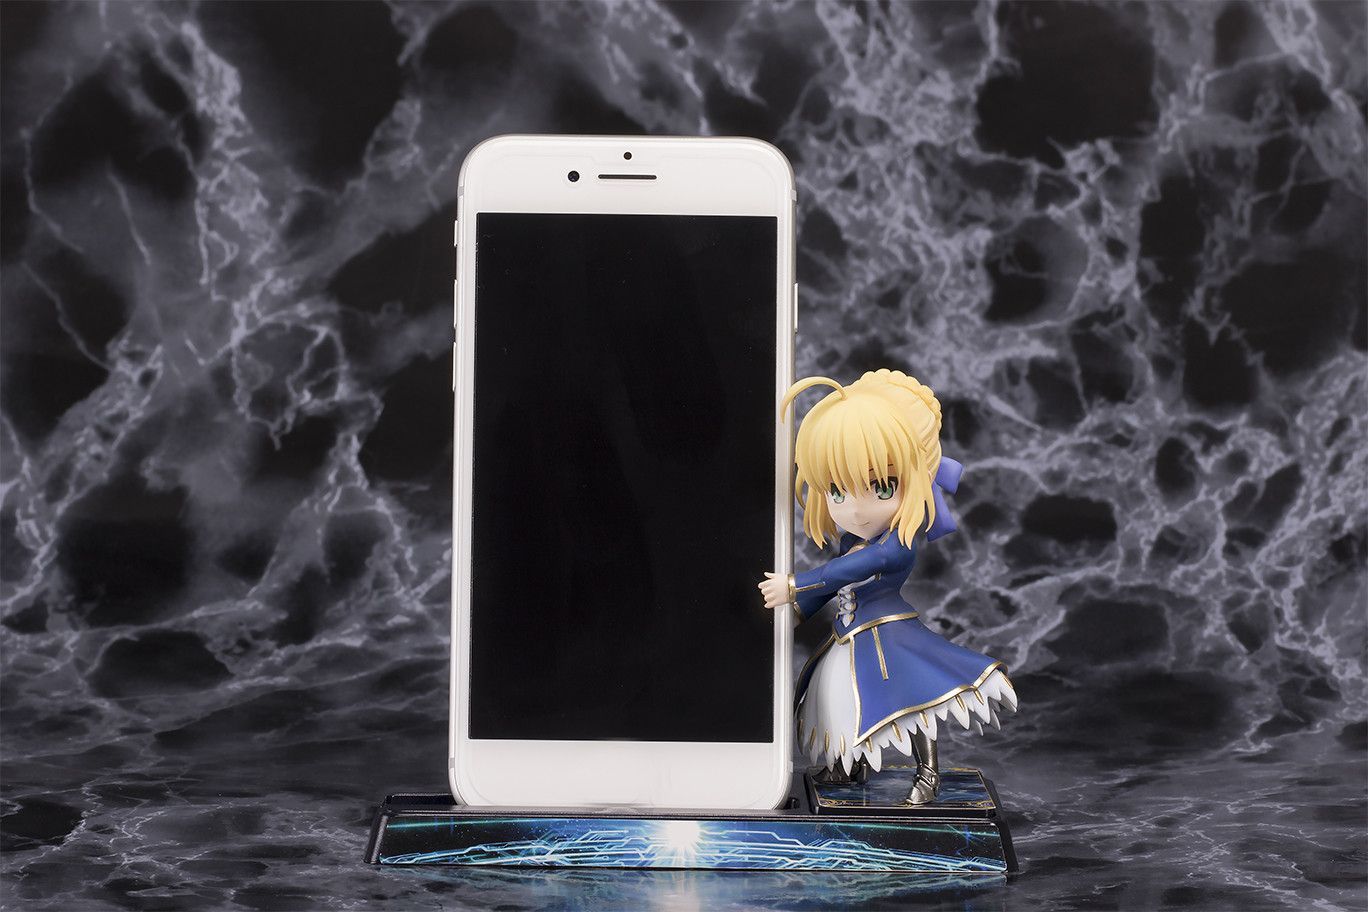 goodie - Saber/Altria Pendragon - Smartphone Stand Bishoujo Character Collection - Pulchra